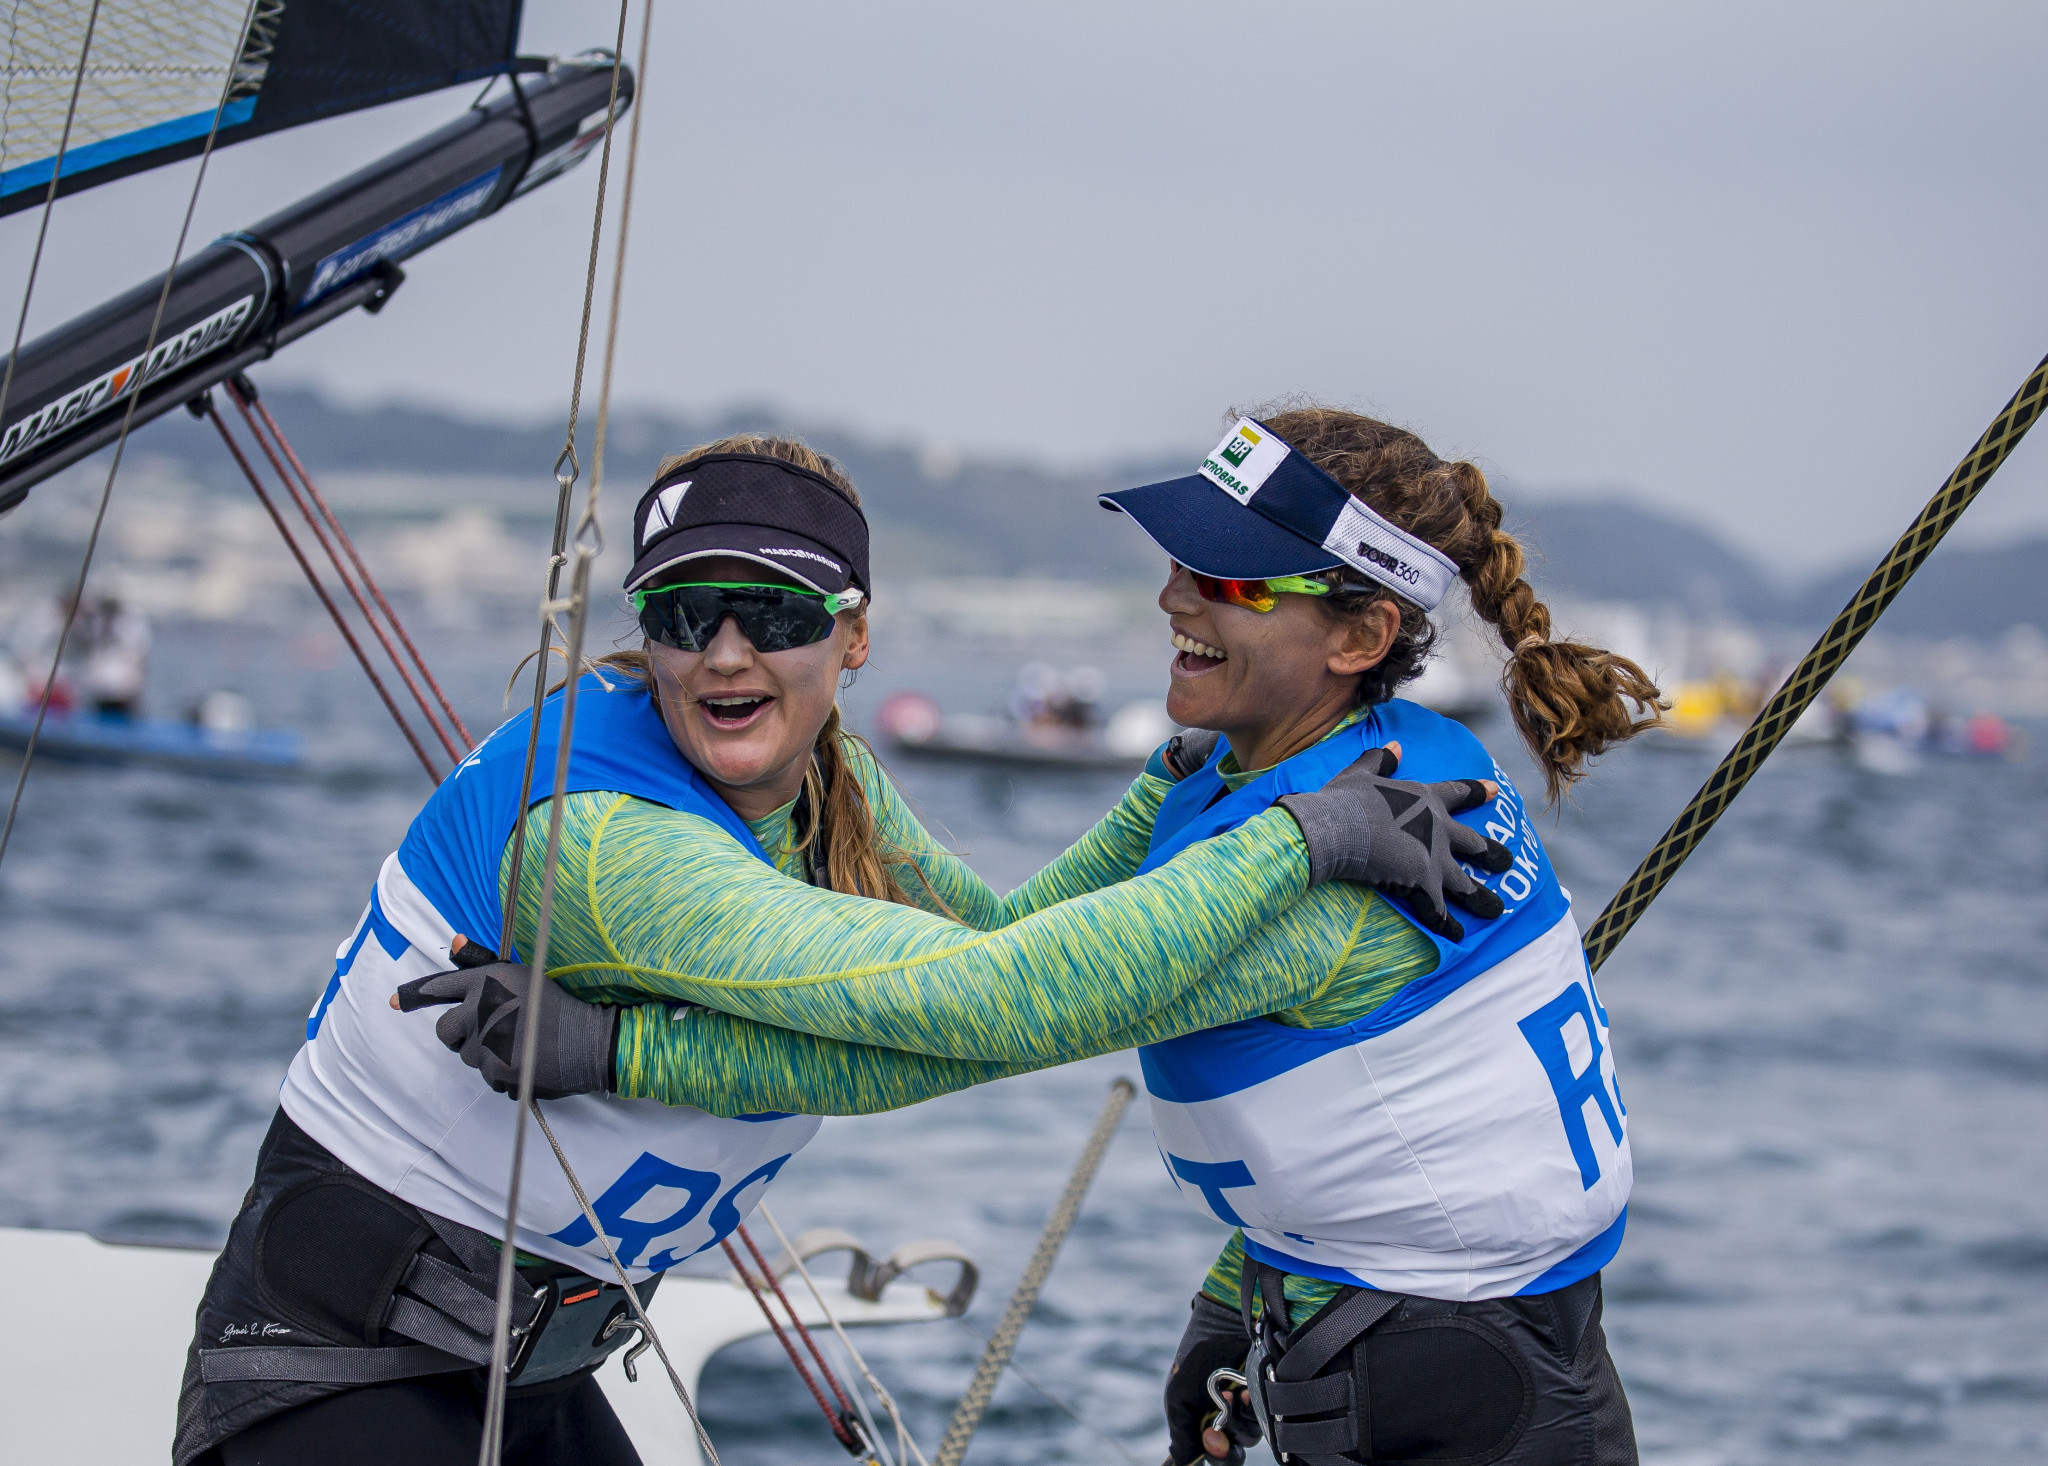 Rio 2016 champions strike gold at Tokyo 2020 sailing test event